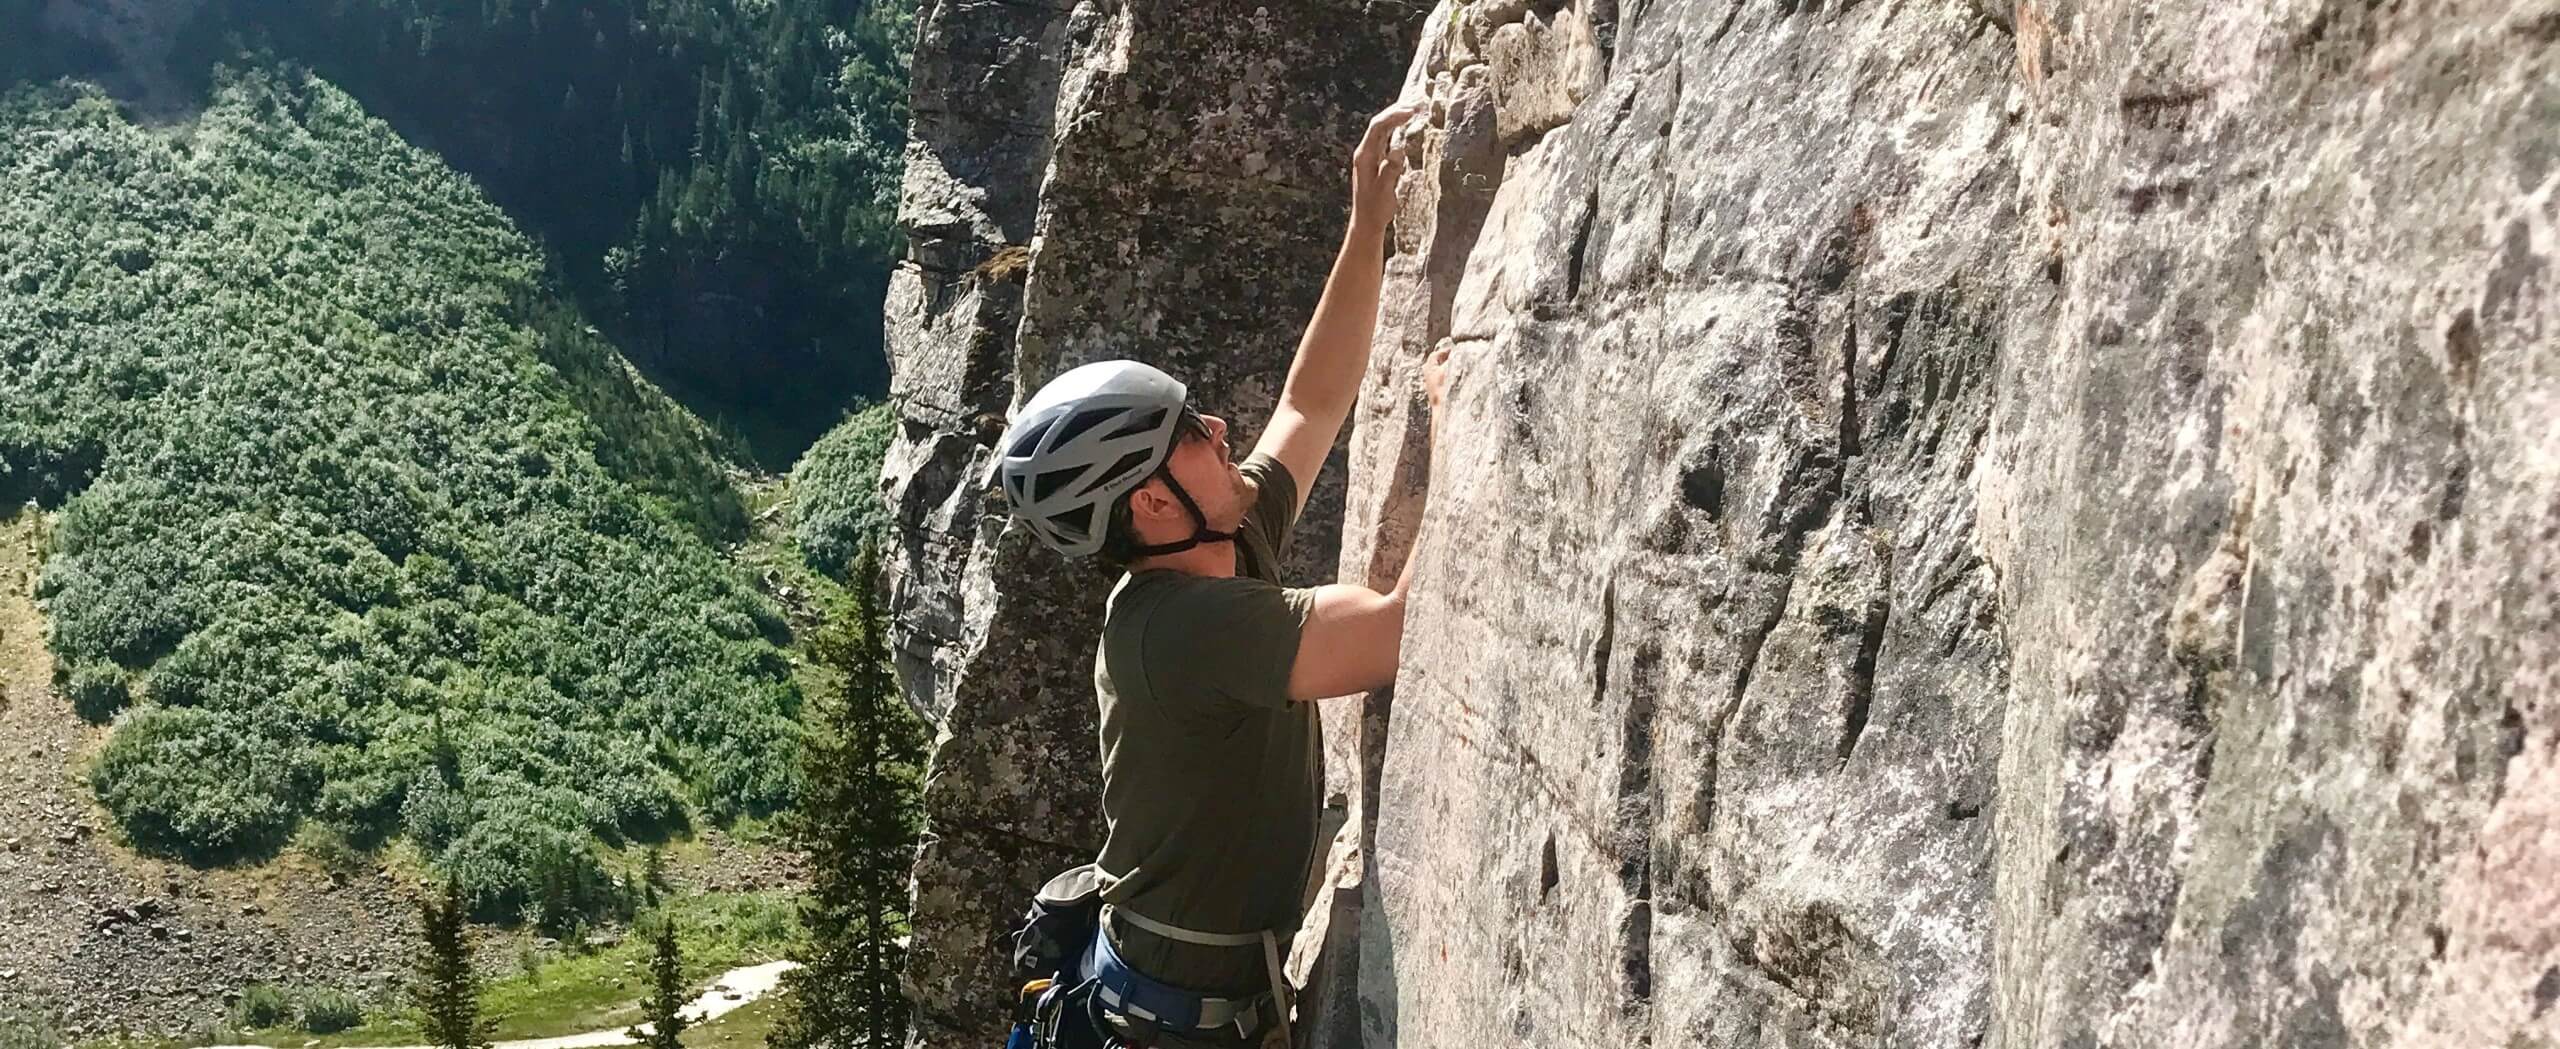 Outdoor Rock Climbing Level 2 in the Canadian Rockies